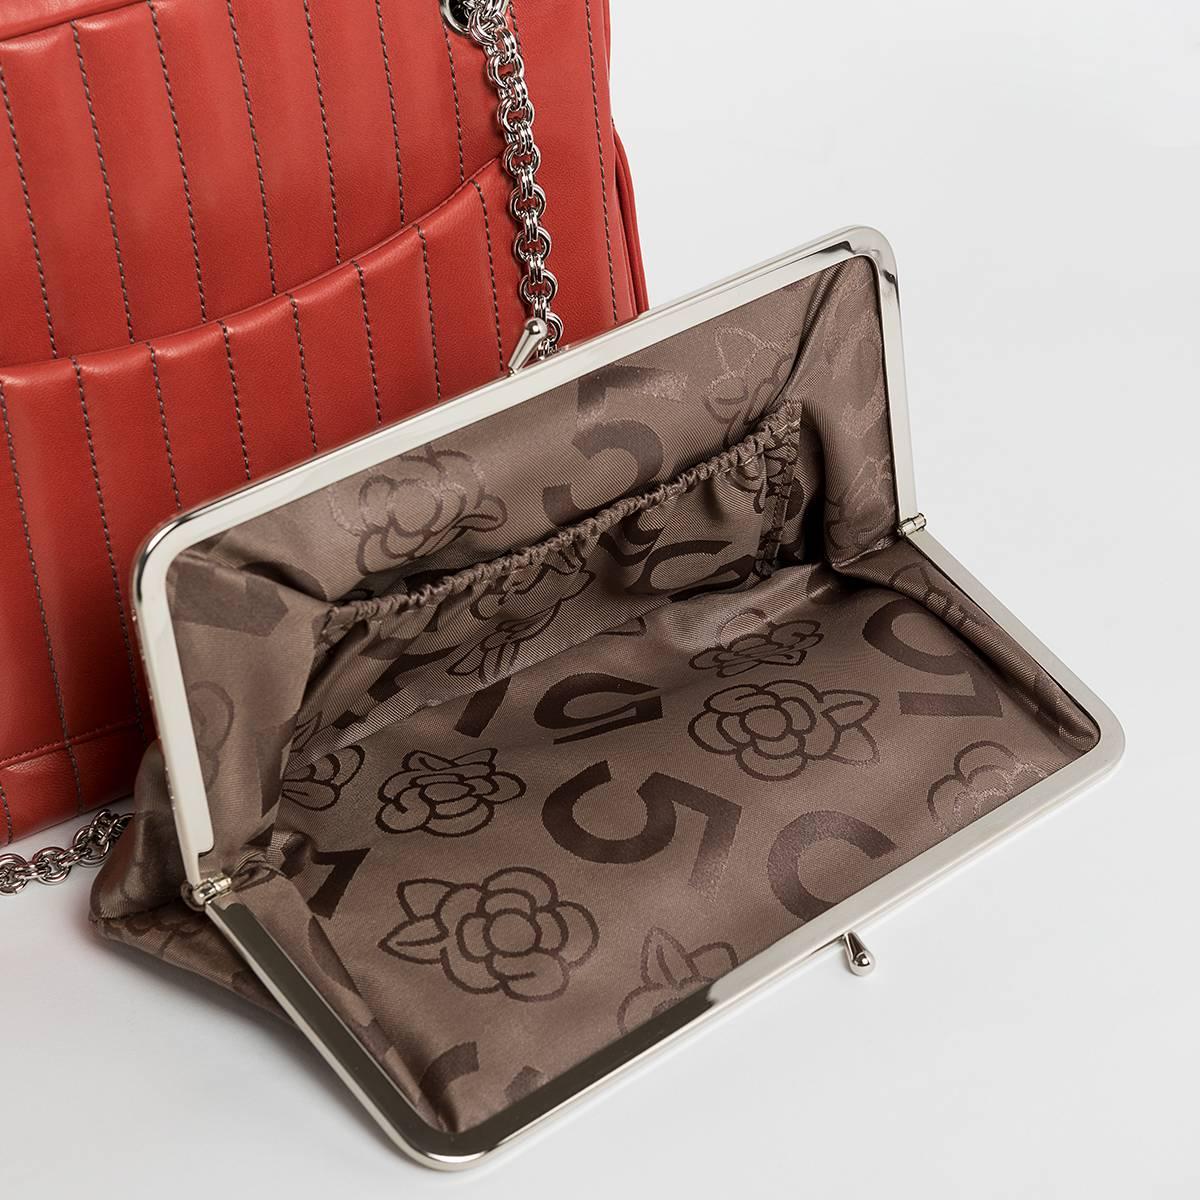 Chanel Geranium Red Lambskin Two Chain Handles Shopping Bag With Side Pockets For Sale 4